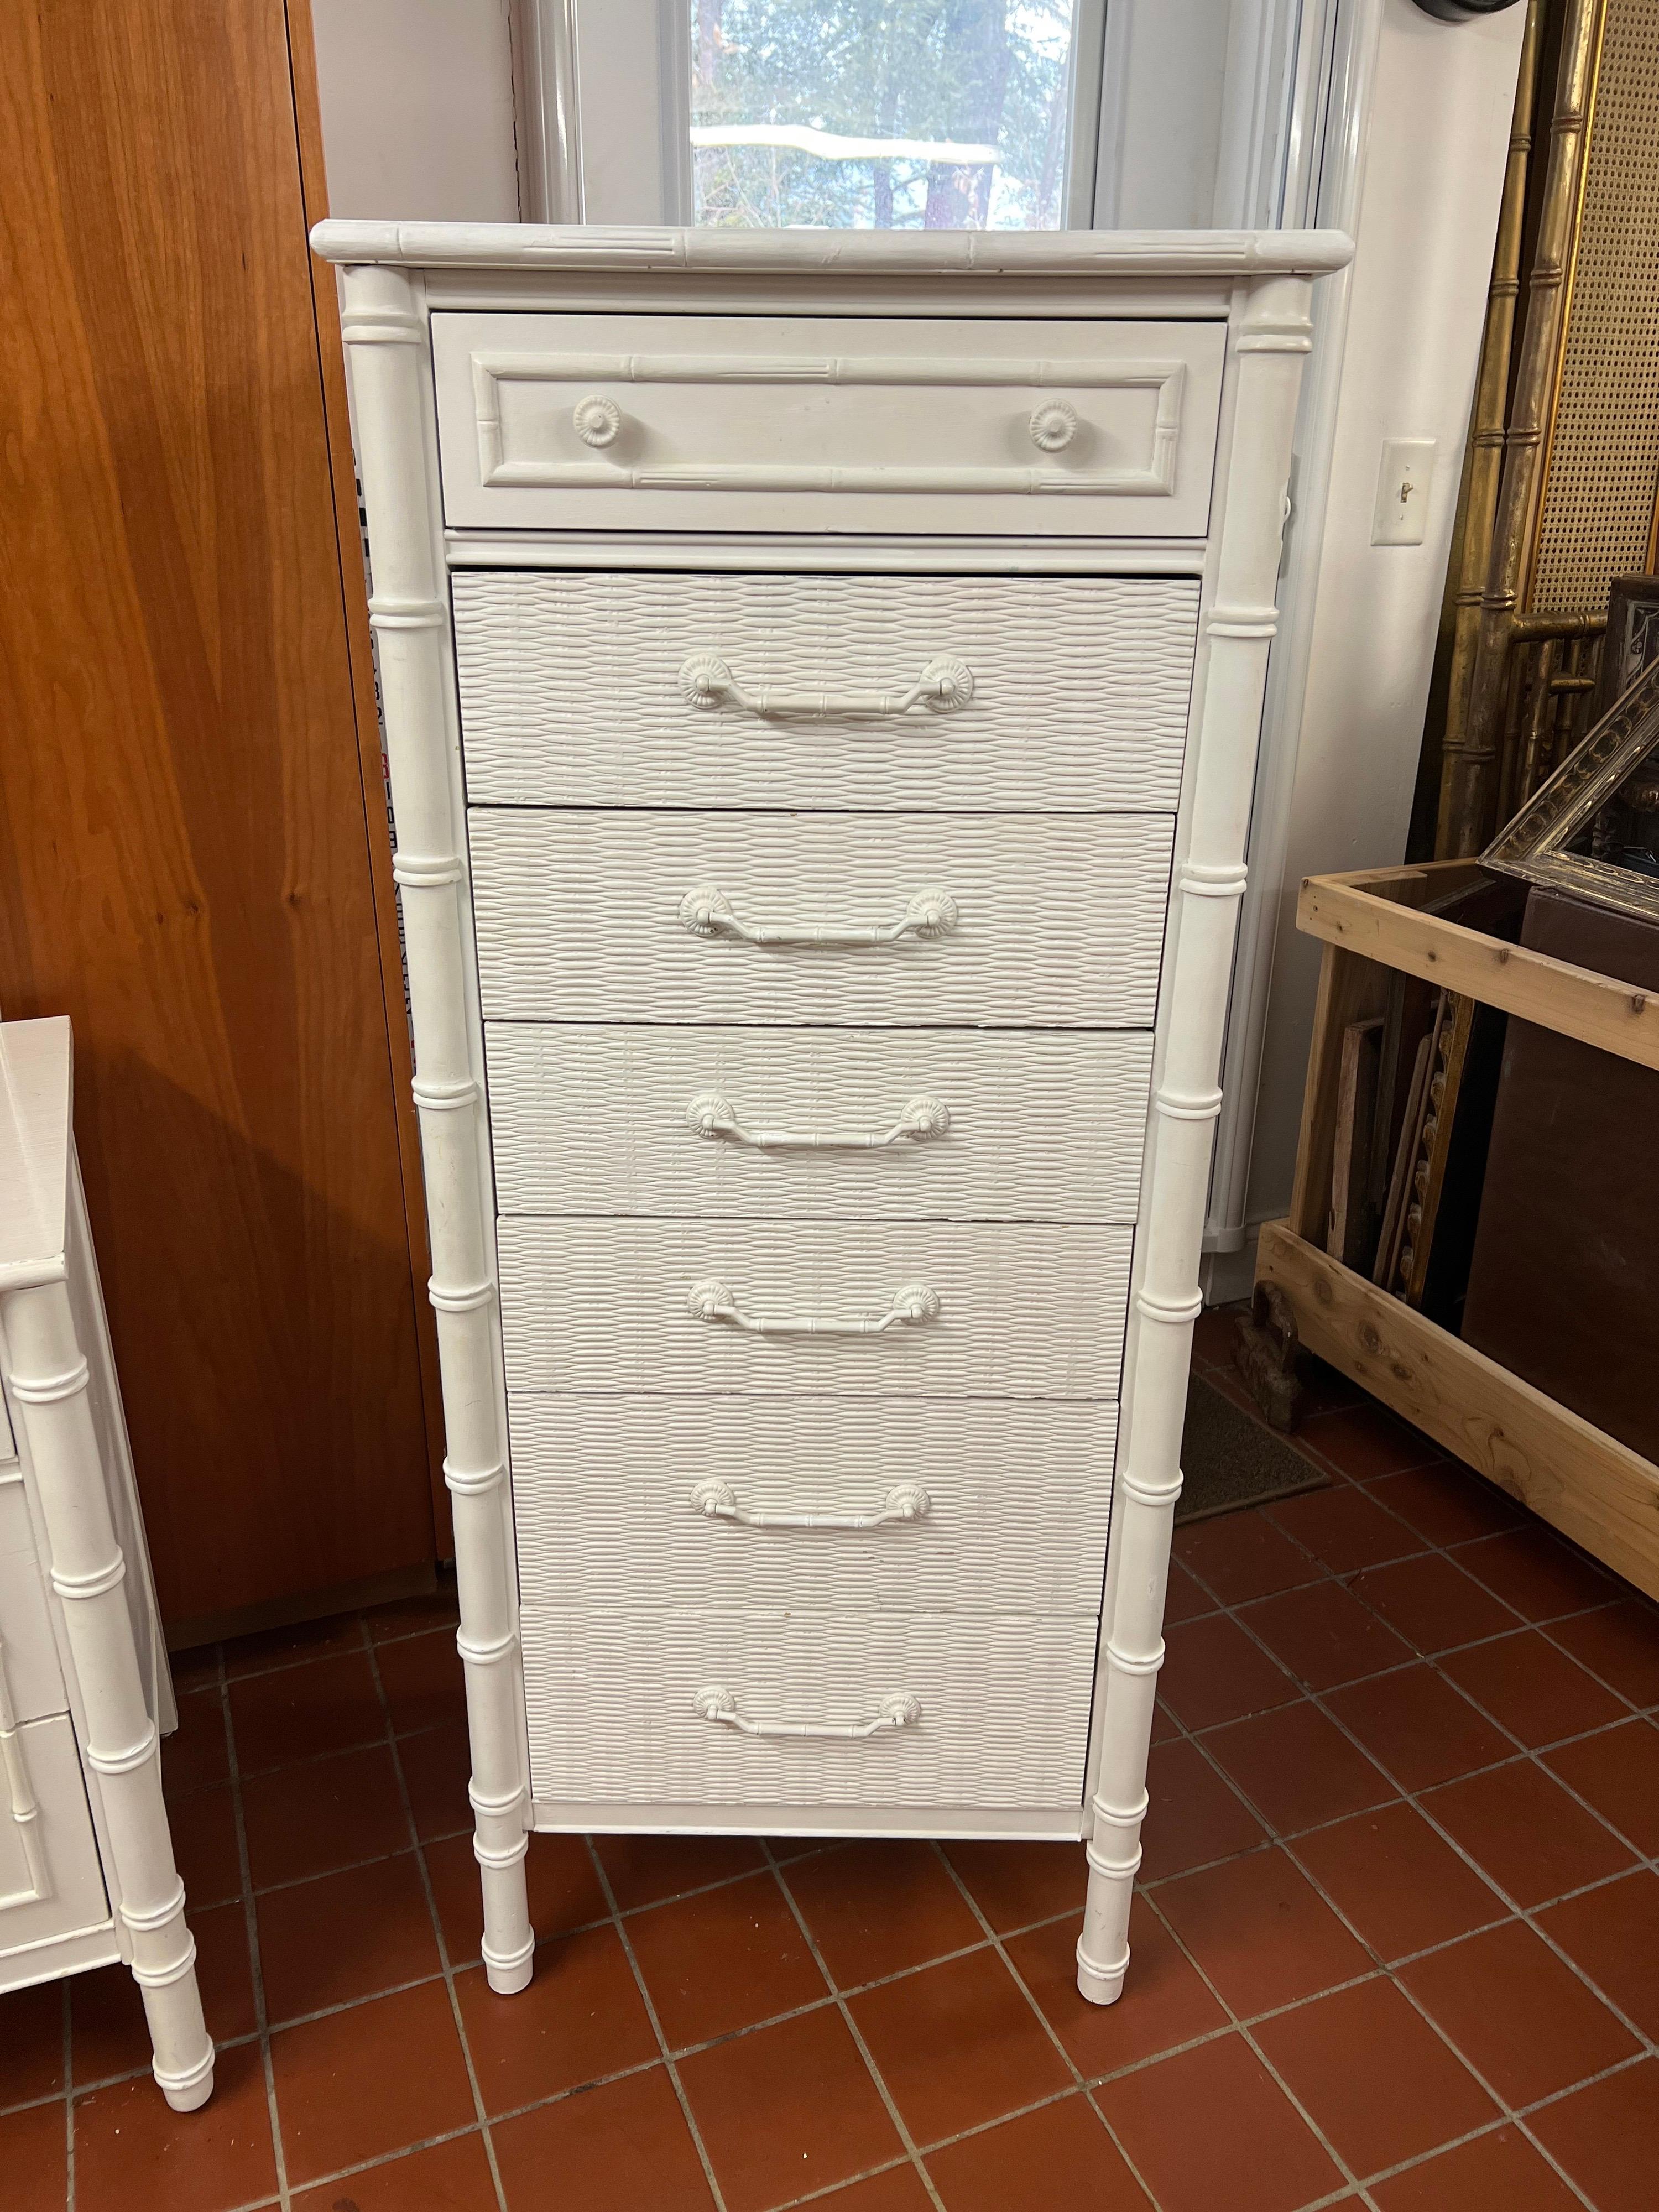 Vintage Thomasville Allegro Style Faux bamboo chest of drawers. Perfect as a semanier/lingerie chest or large jewelry dresser for a closet or dressing room. It would even work as a dresser in a baby’s room. This comes in a painted white finish with